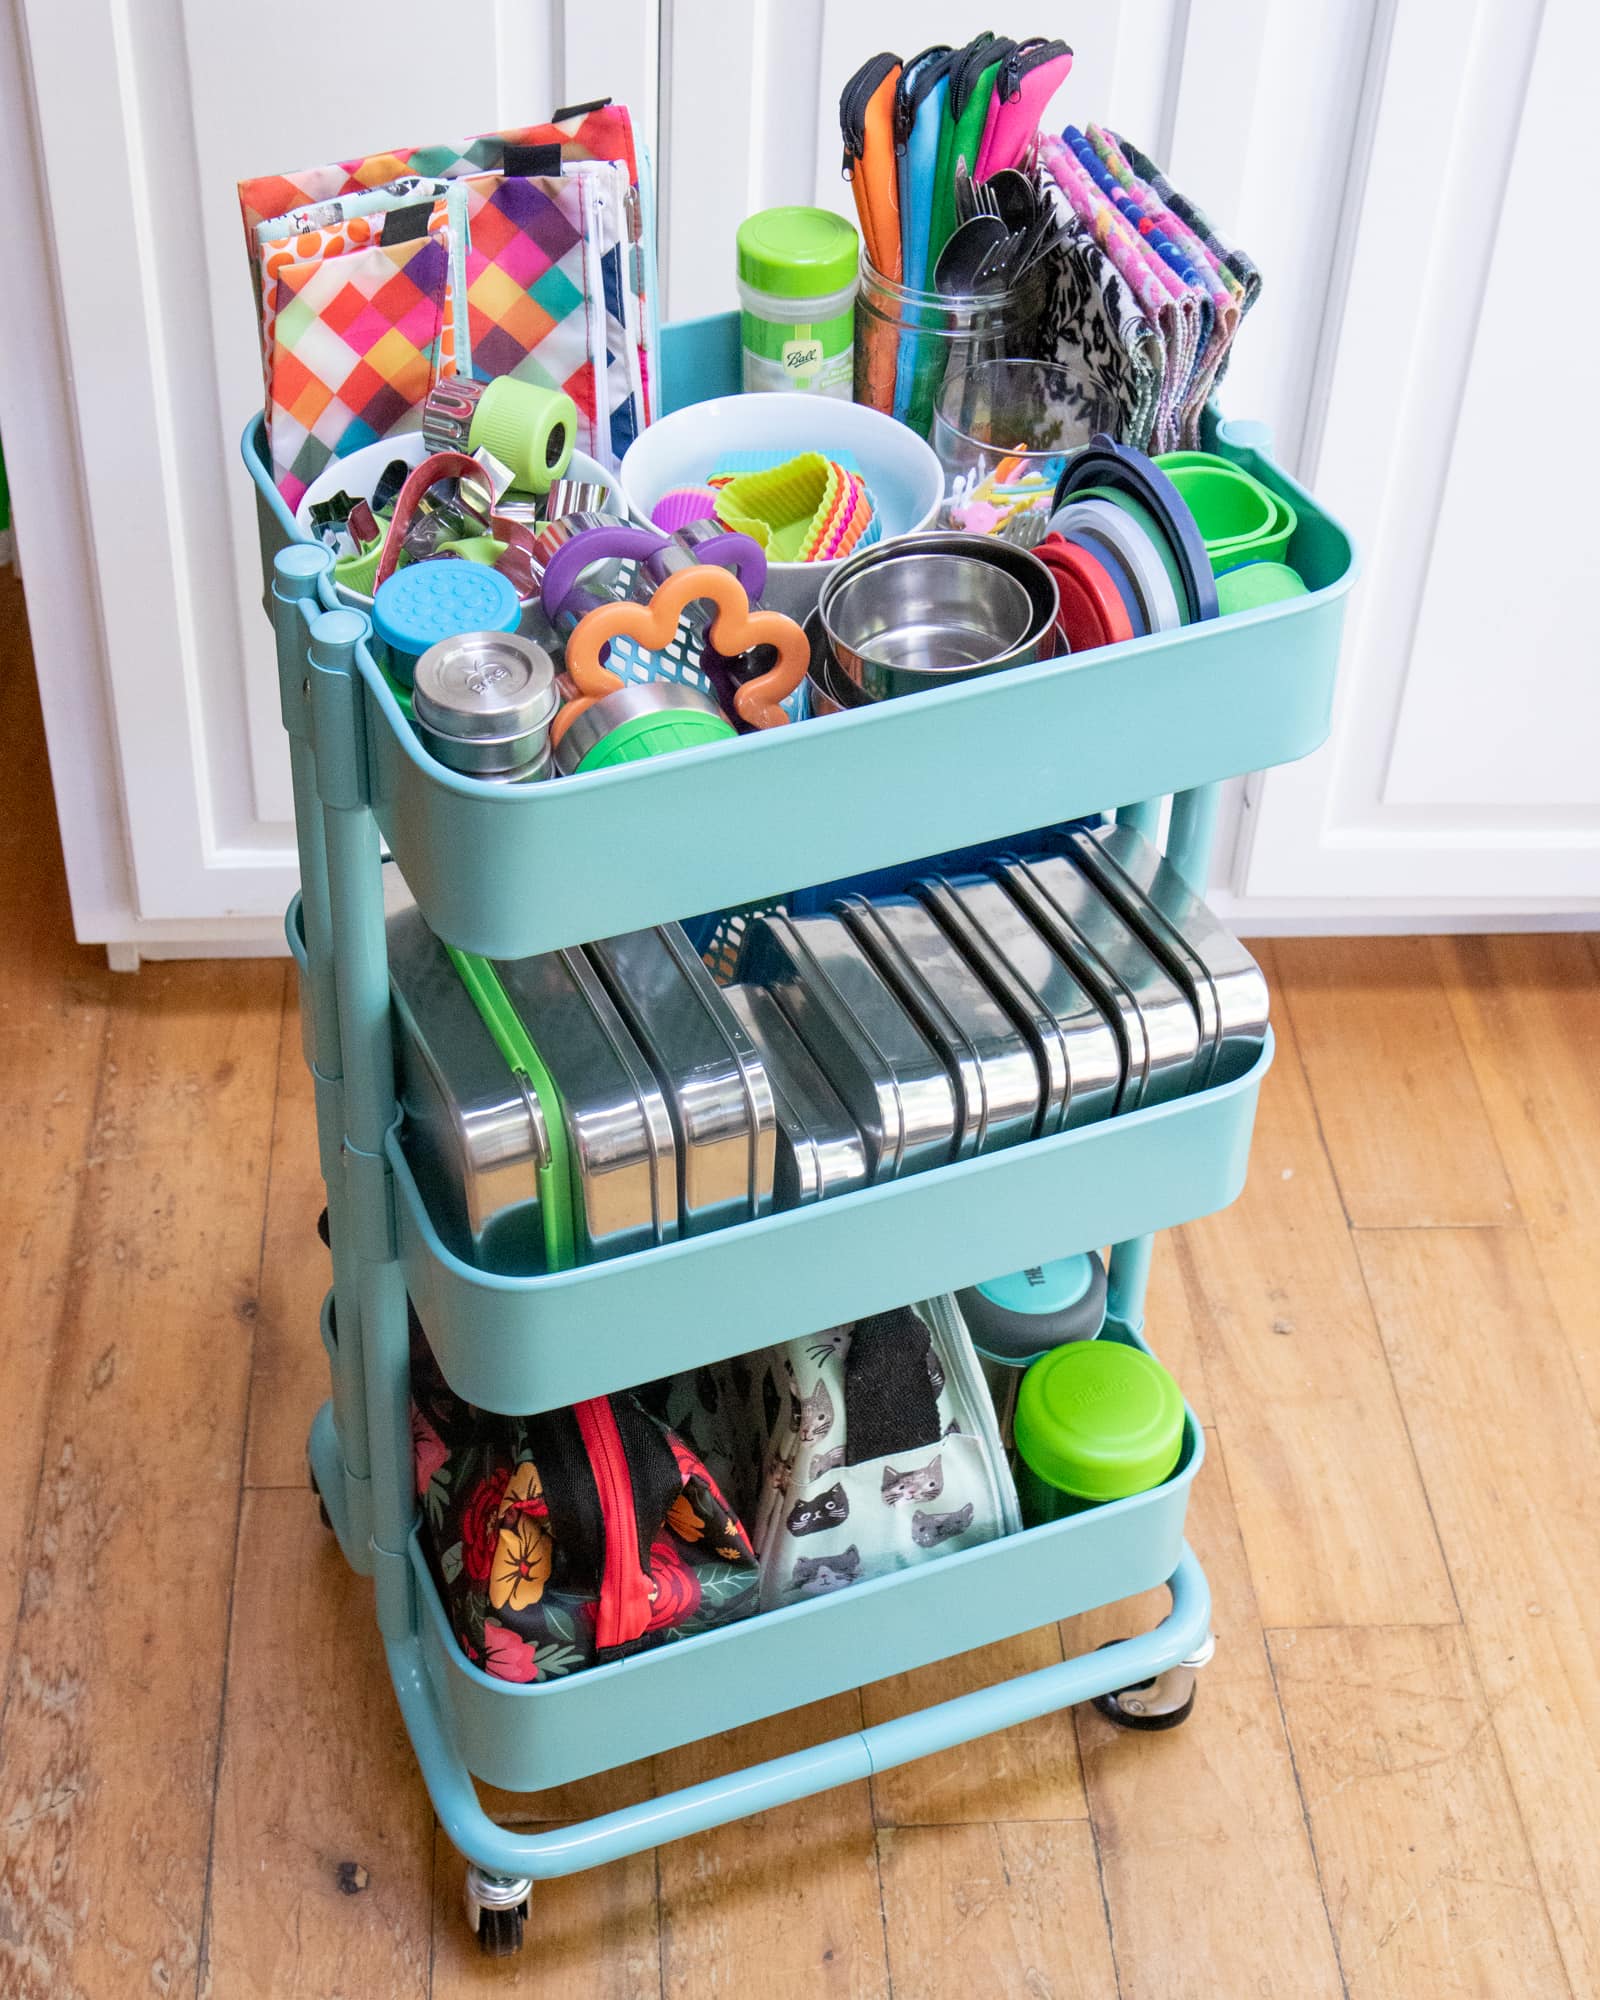 Rolling utility cart filled with tools and materials for packing zero-waste lunches.